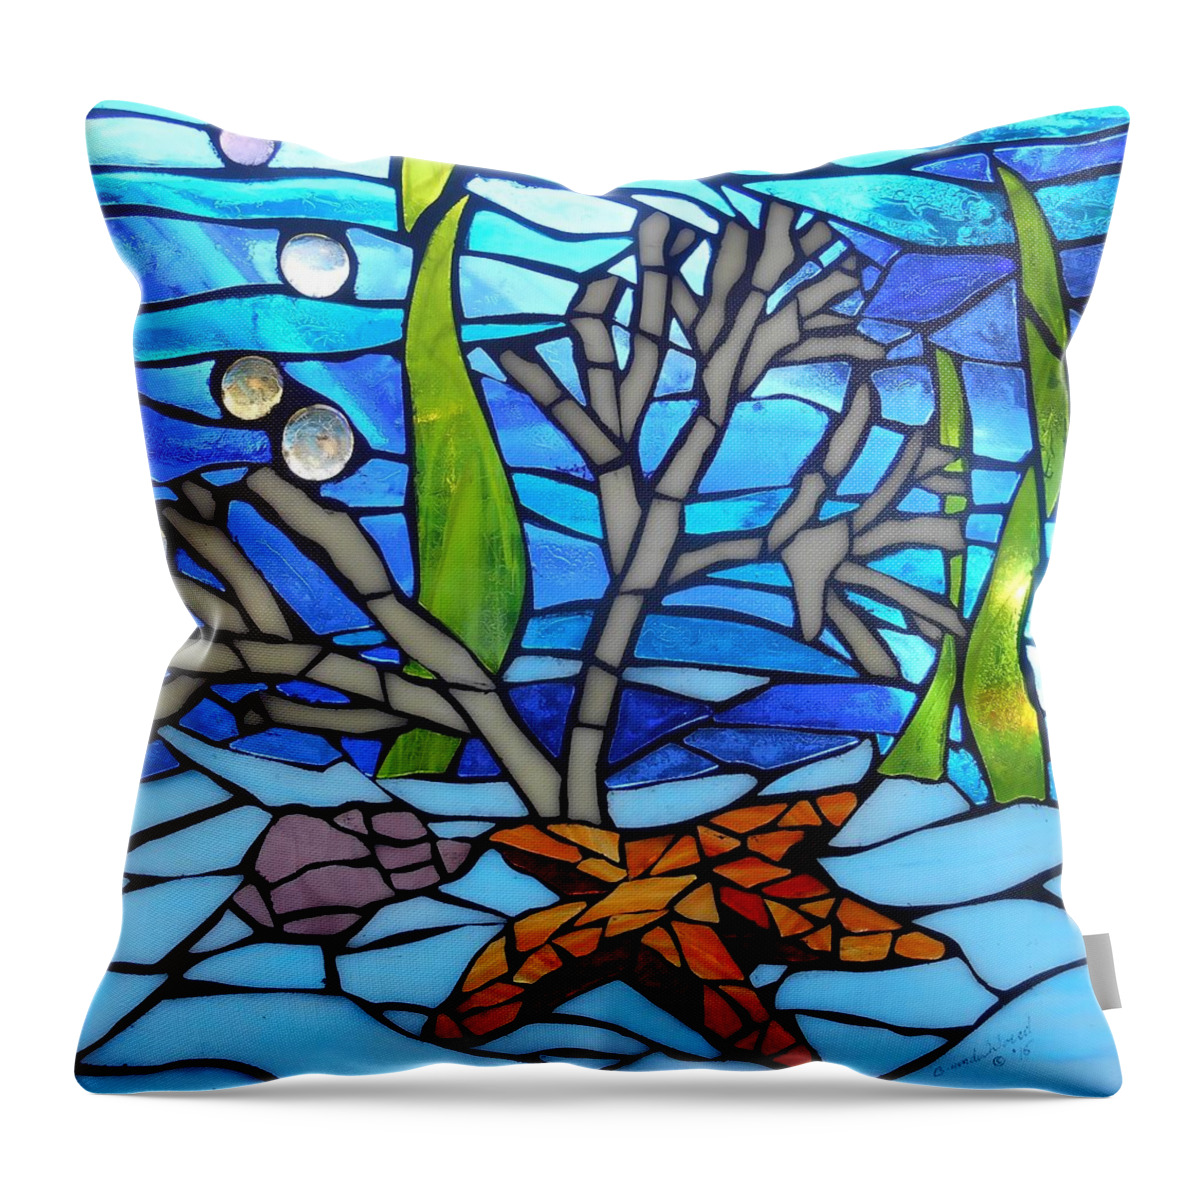 Mosaic Throw Pillow featuring the glass art Mosaic Stained Glass - Jewels Beneath by Catherine Van Der Woerd